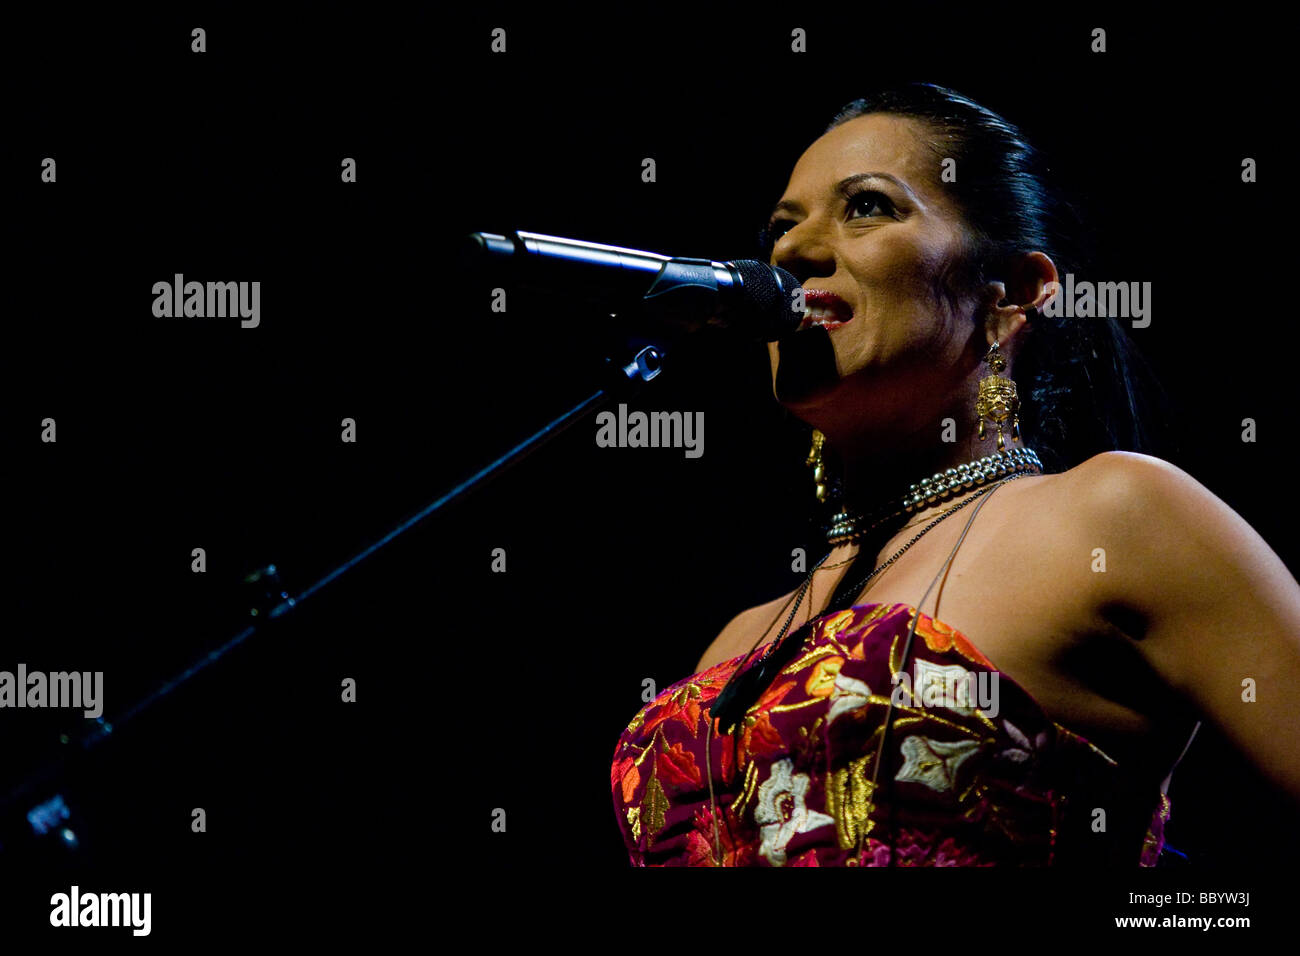 The Mexican singer Lila Downs live in the concert hall of the KKL Lucerne, Switzerland Stock Photo